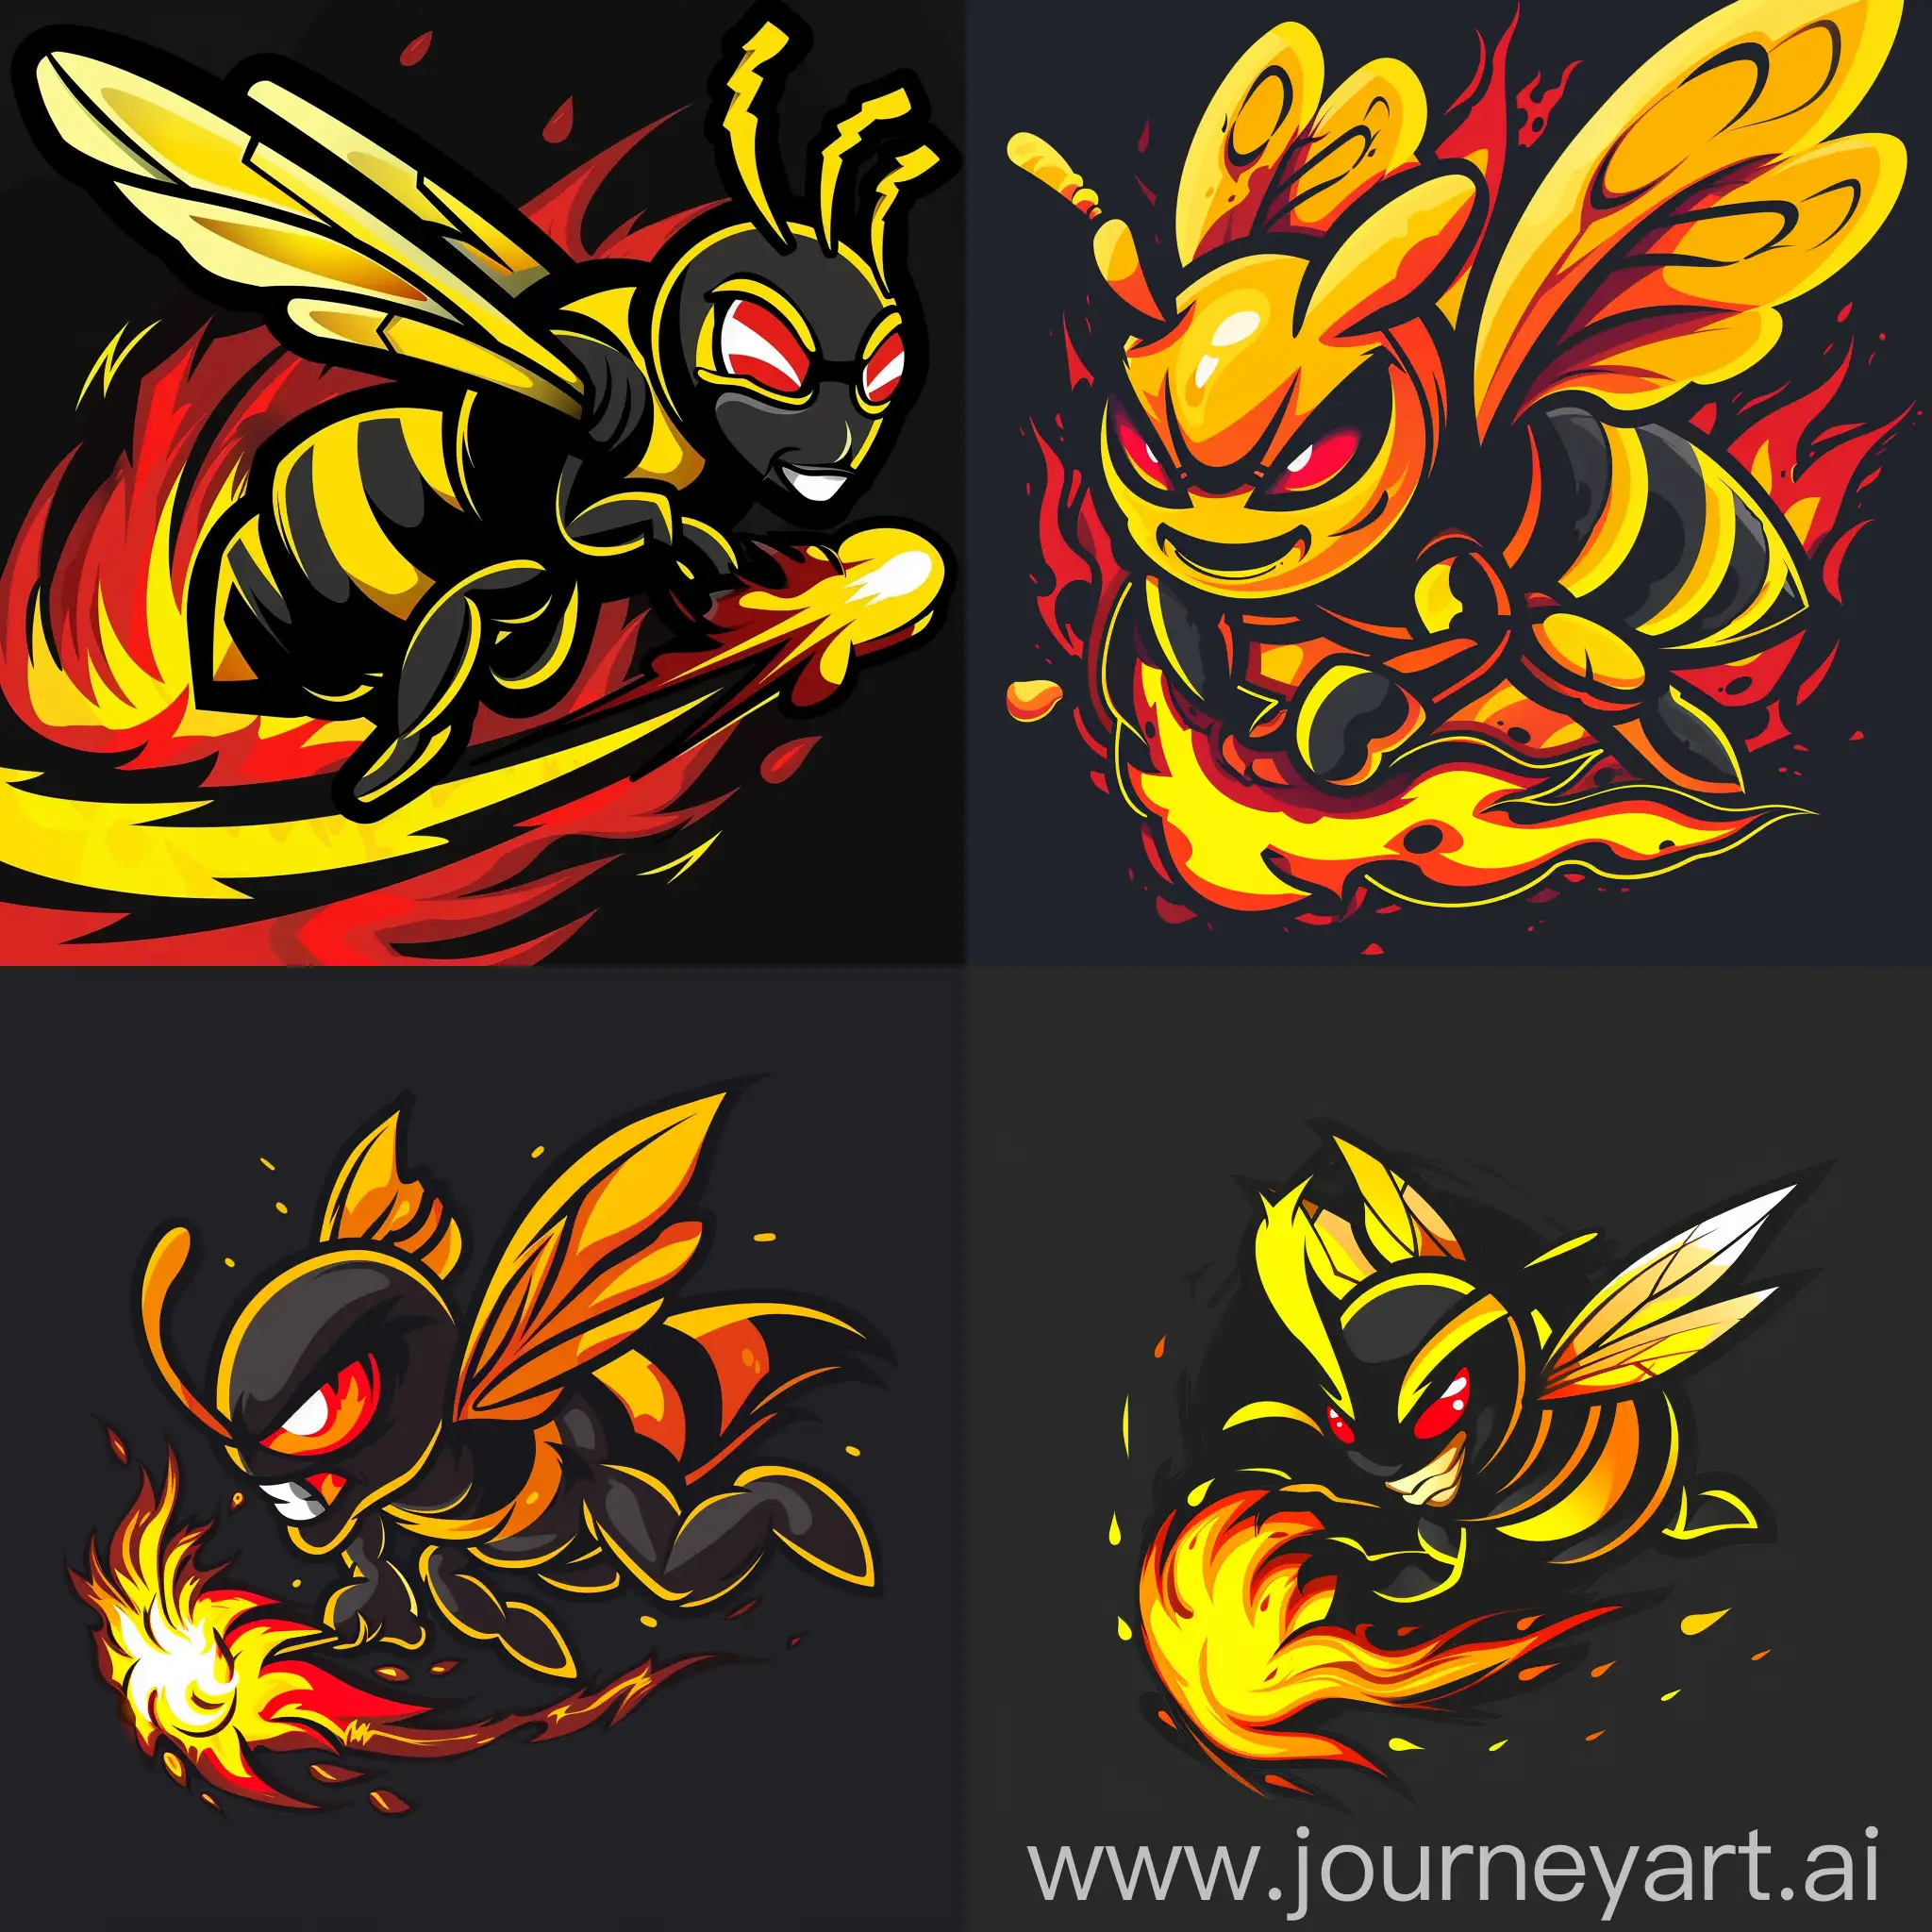 Mascot is the logo of an angry bee with red eyes, bright yellow and black stripes on its body and wings. The bee is bent in an attacking position, and a trail of fire is coming from its sting. You can add fire sparks or whirlwinds around her to emphasize her evil appearance. The logo is made in bright colors - yellow, black and red, so that it is noticeable on the athletes' uniforms and attracts the attention of the audience.
